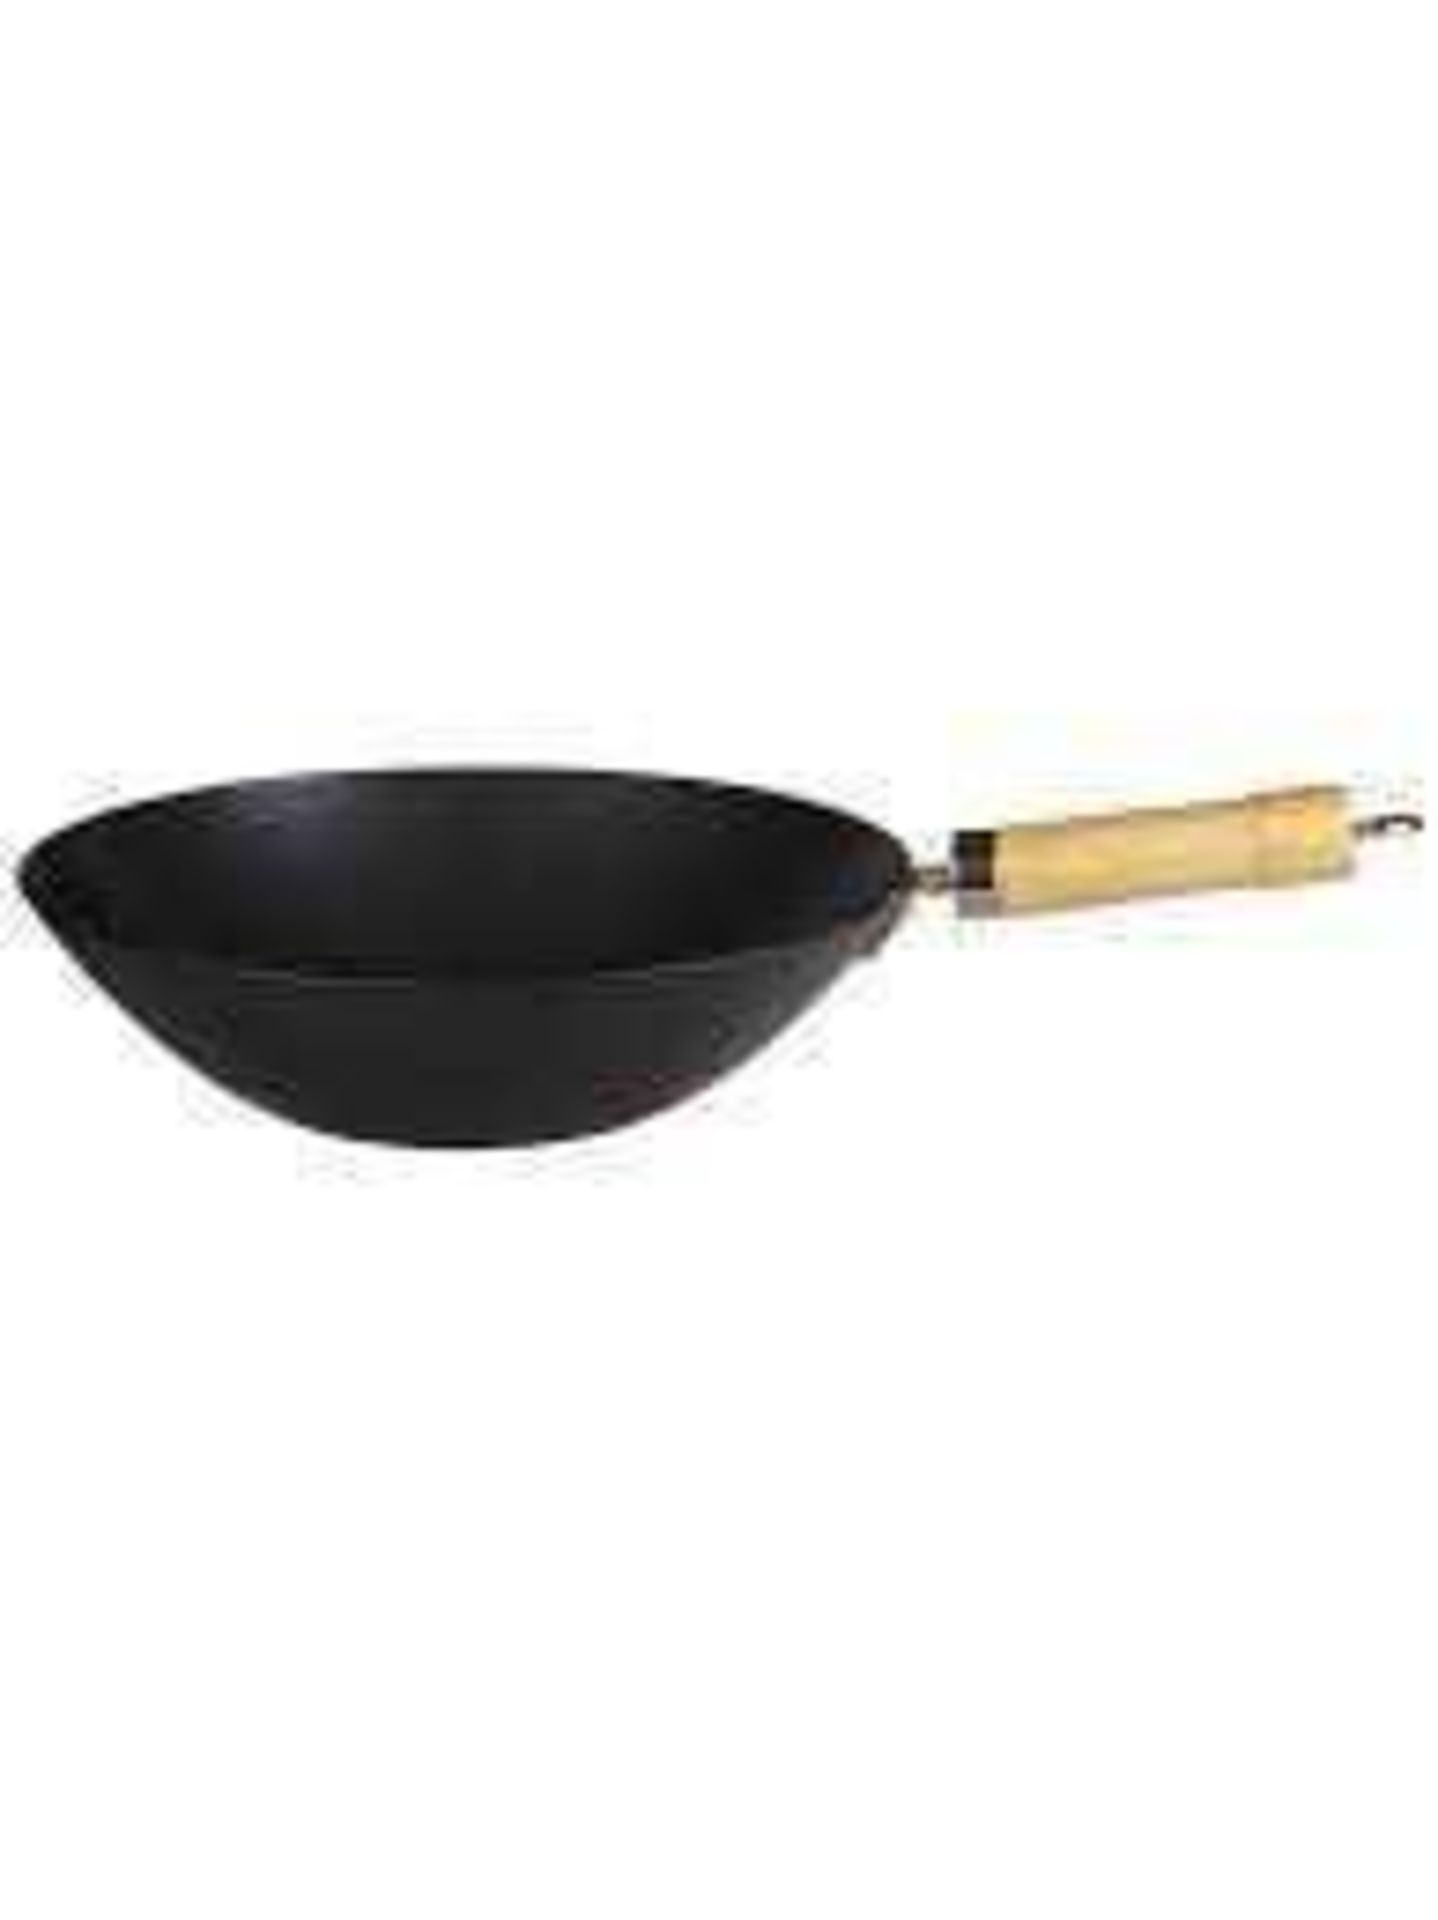 Combined RRP £180 What To Contain A Sorted John Lewis Frying Pans, John Lewis Wok And John Lewis Cas